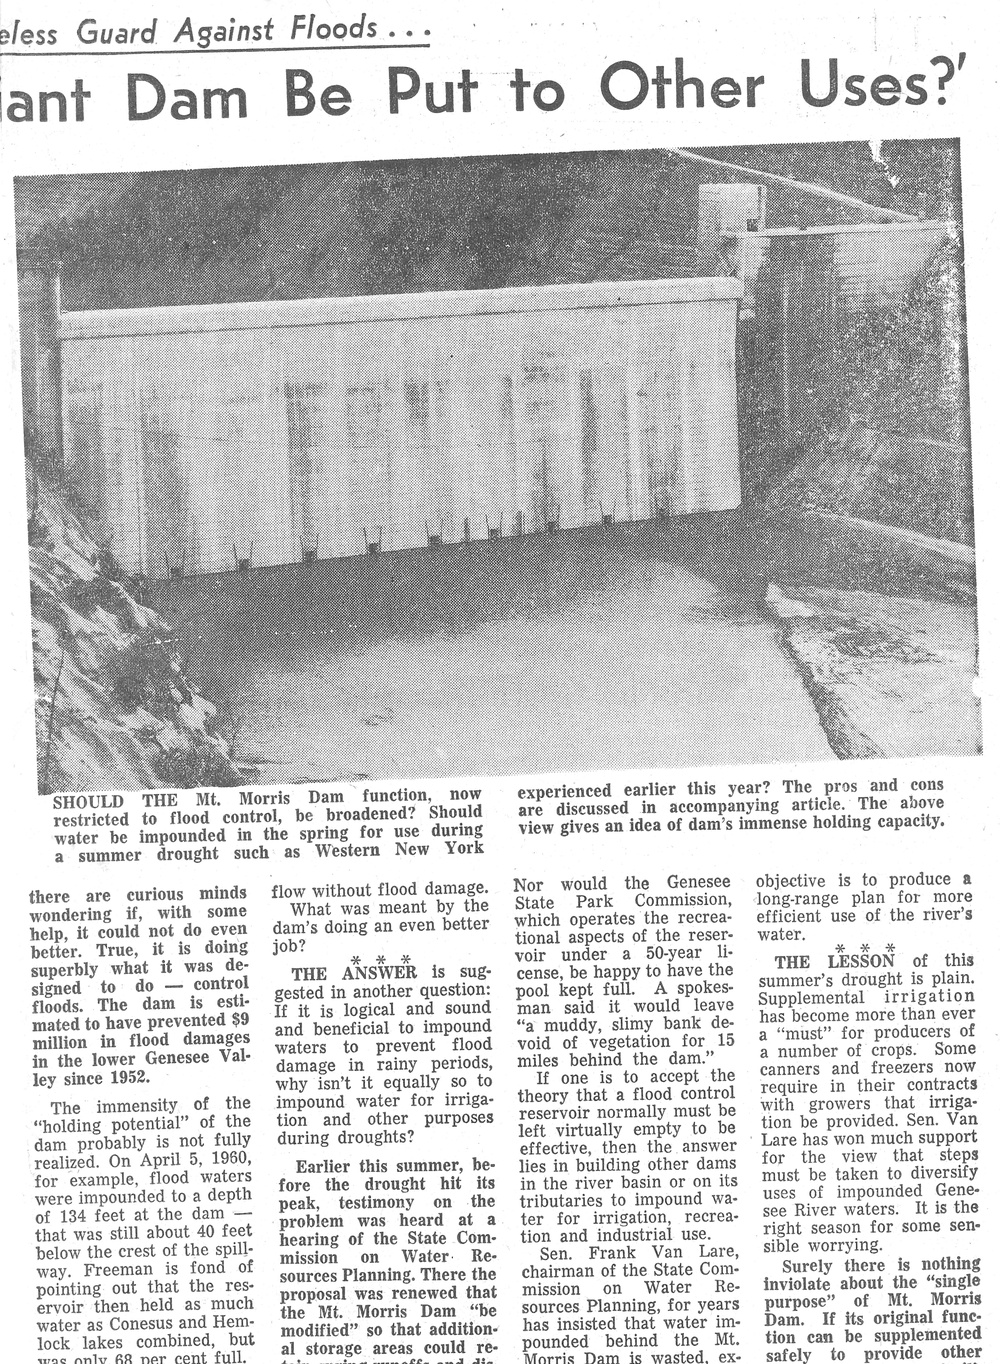 Rochester Democrat and Chronicle, Saturday, August 10, 1963: 'Can’t Giant Dam Be Put to Other Uses?’